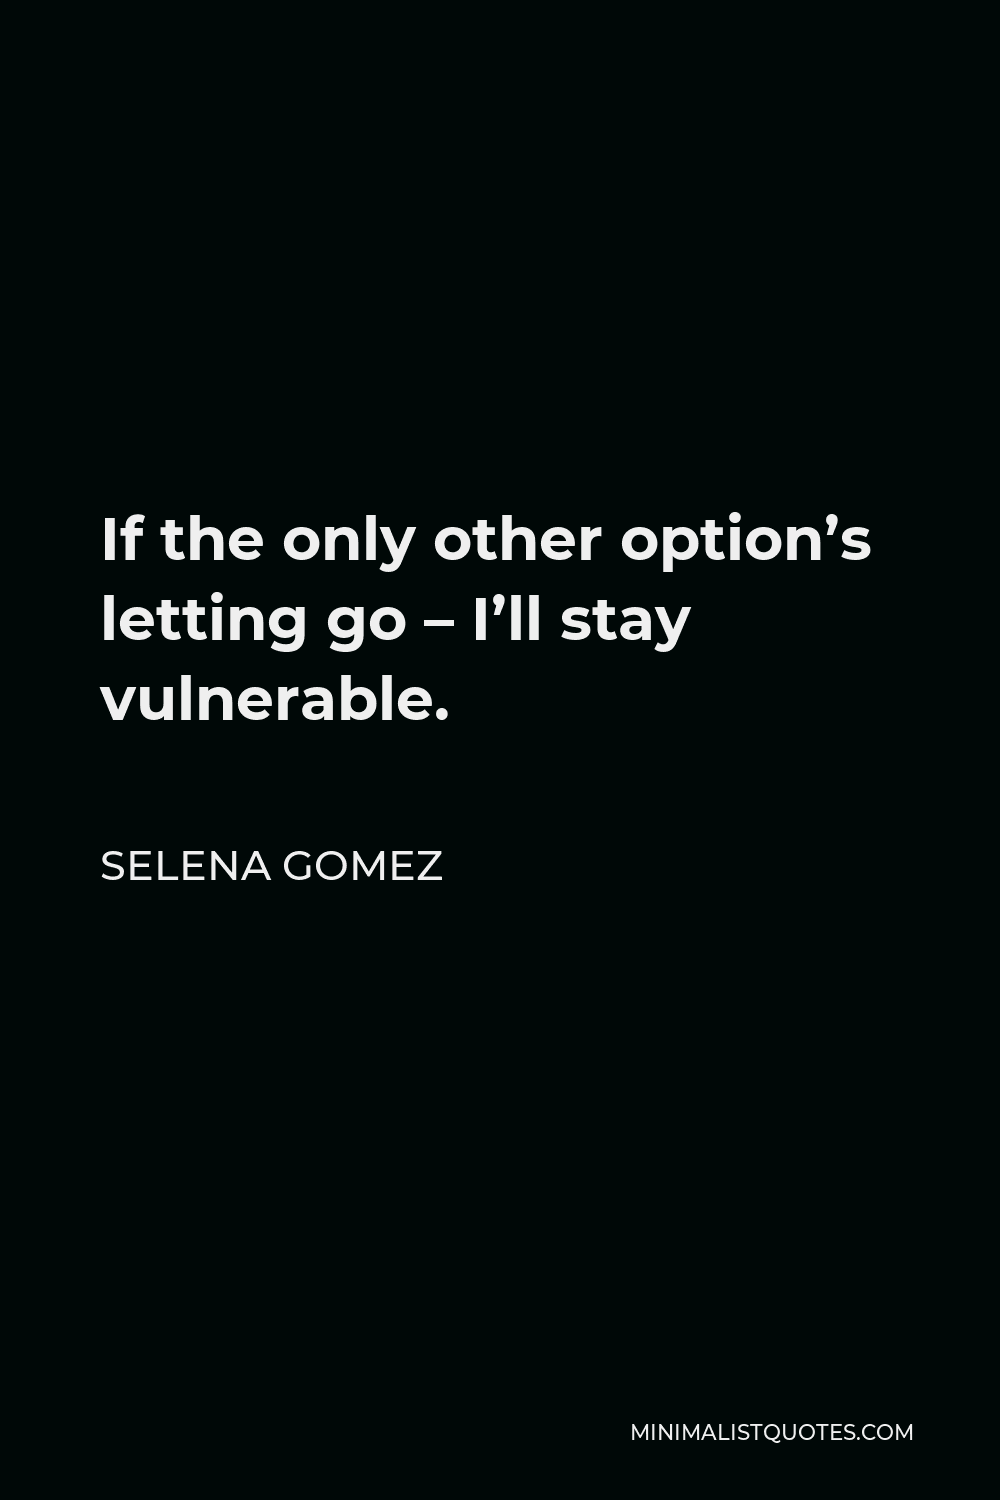 Selena Gomez Quote - If the only other option’s letting go – I’ll stay vulnerable.